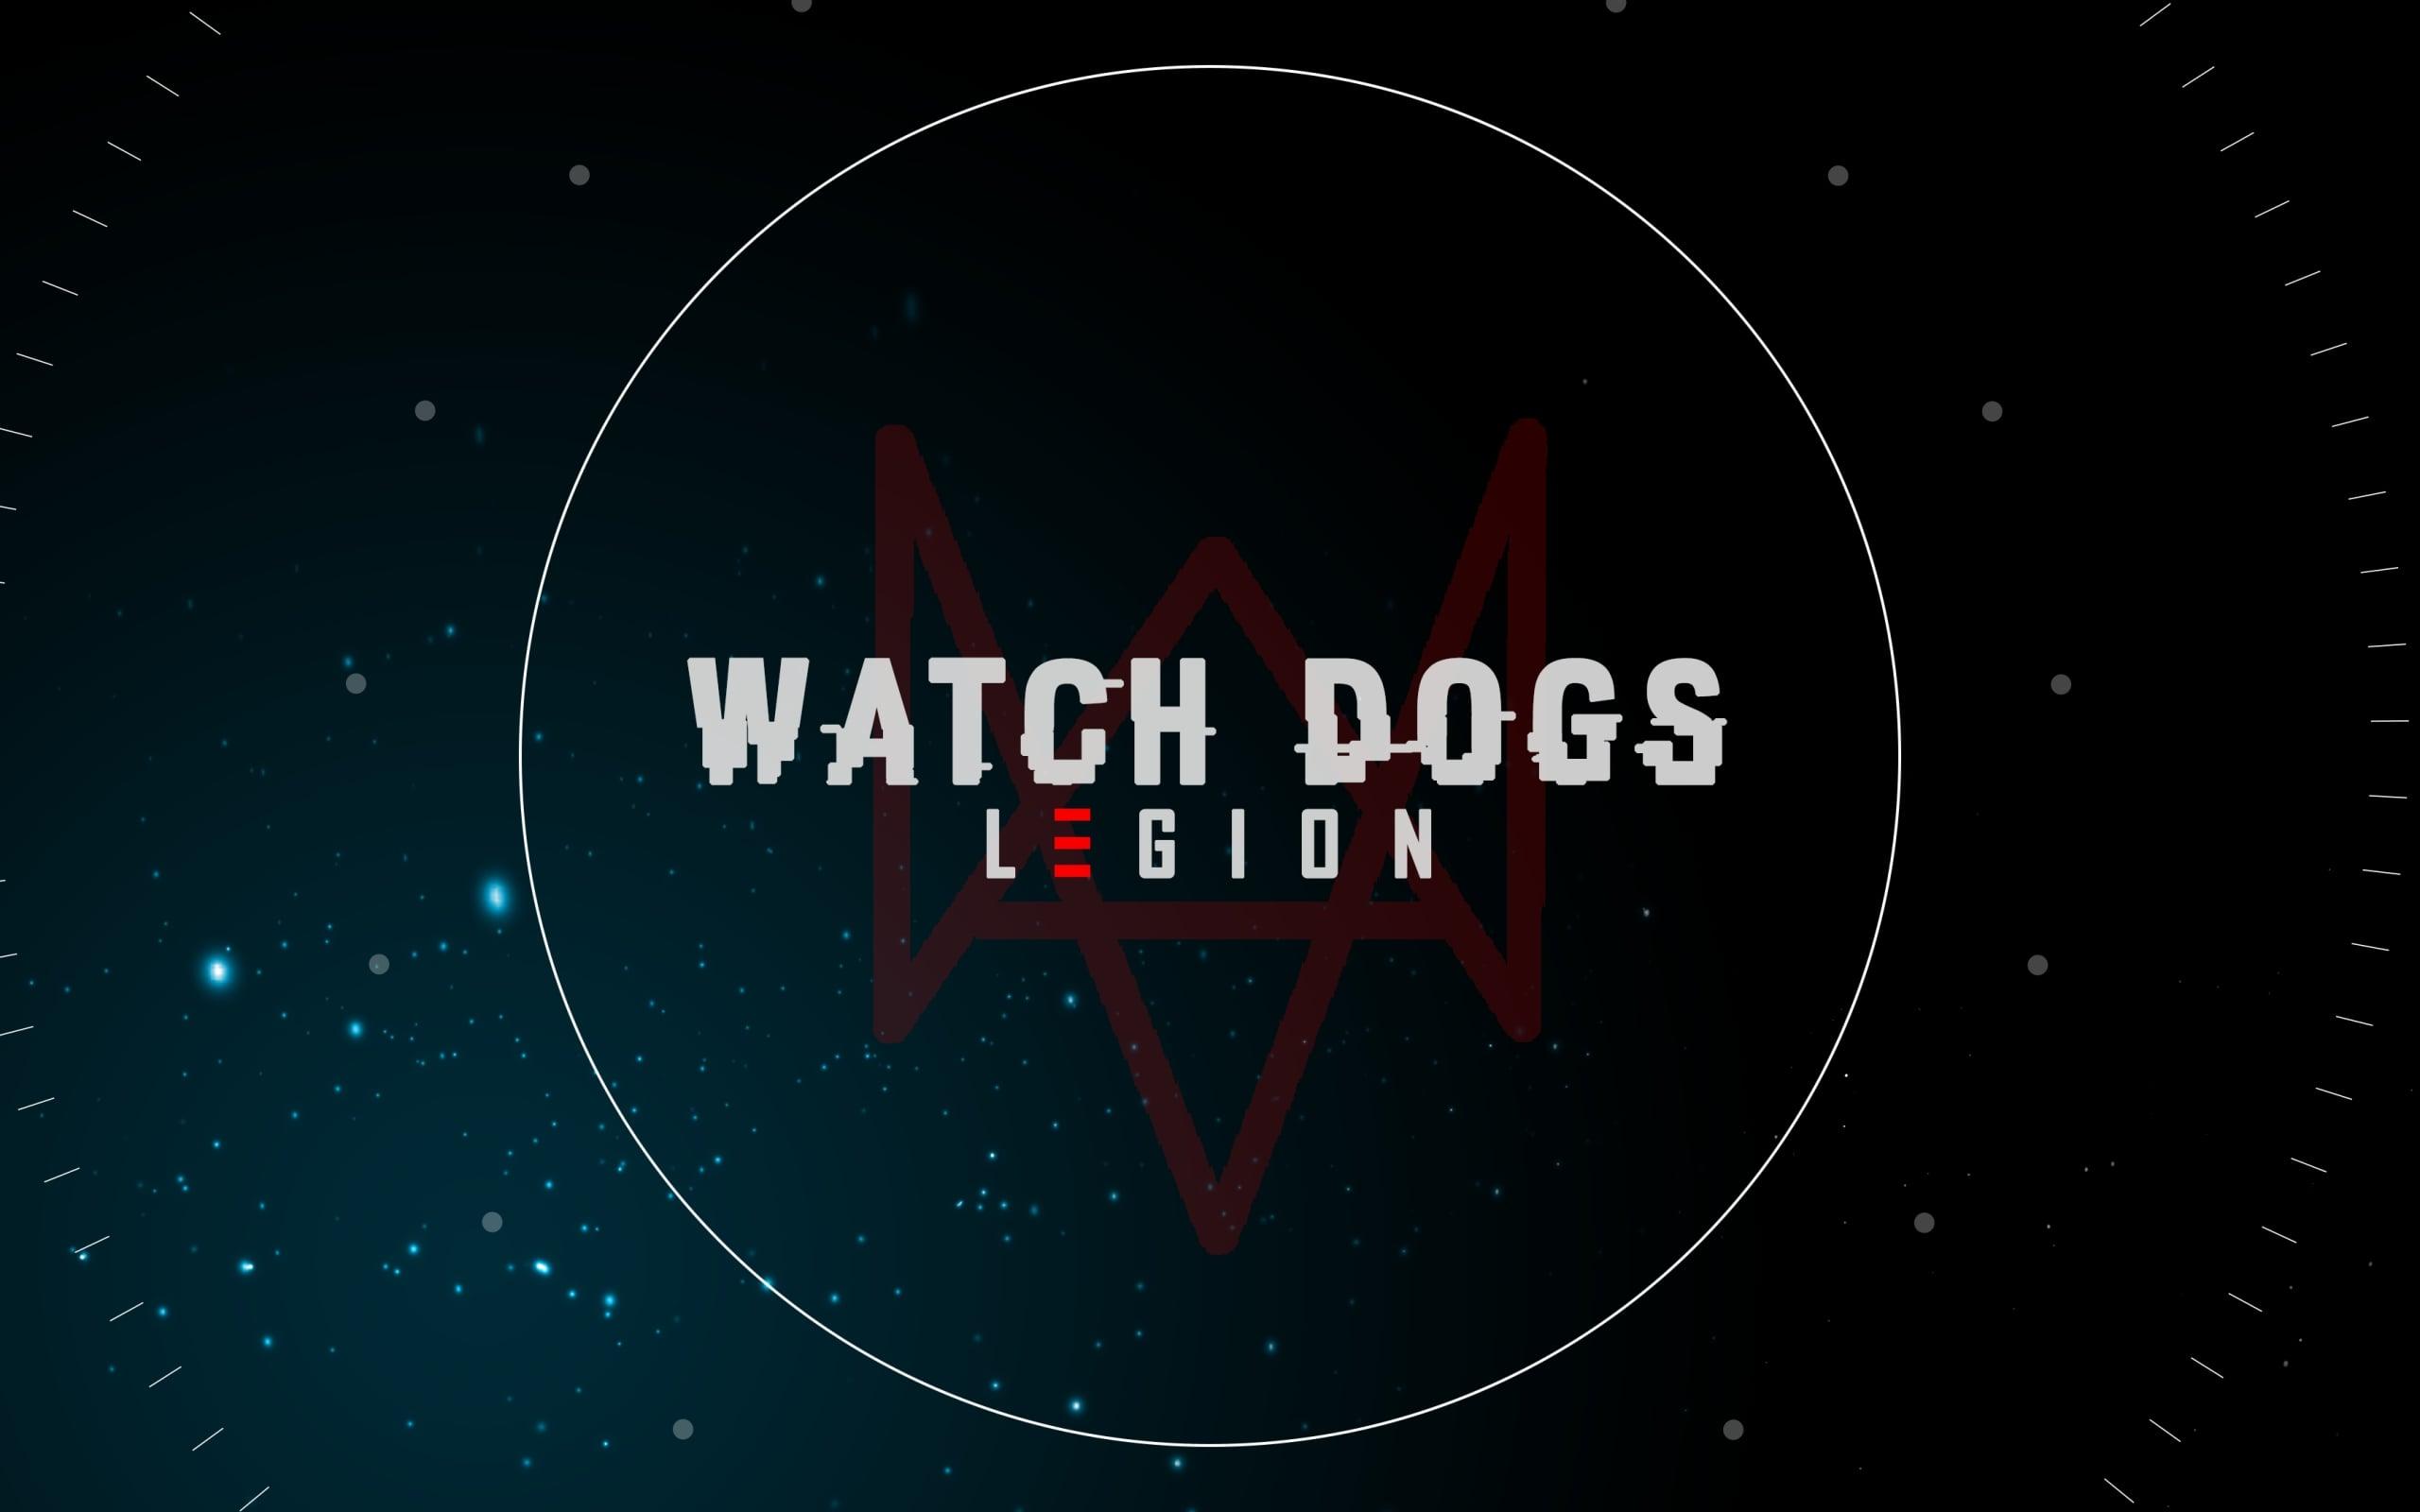 Wallpaper of Watch Dogs, Legion, Ubisoft, Poster background & HD image